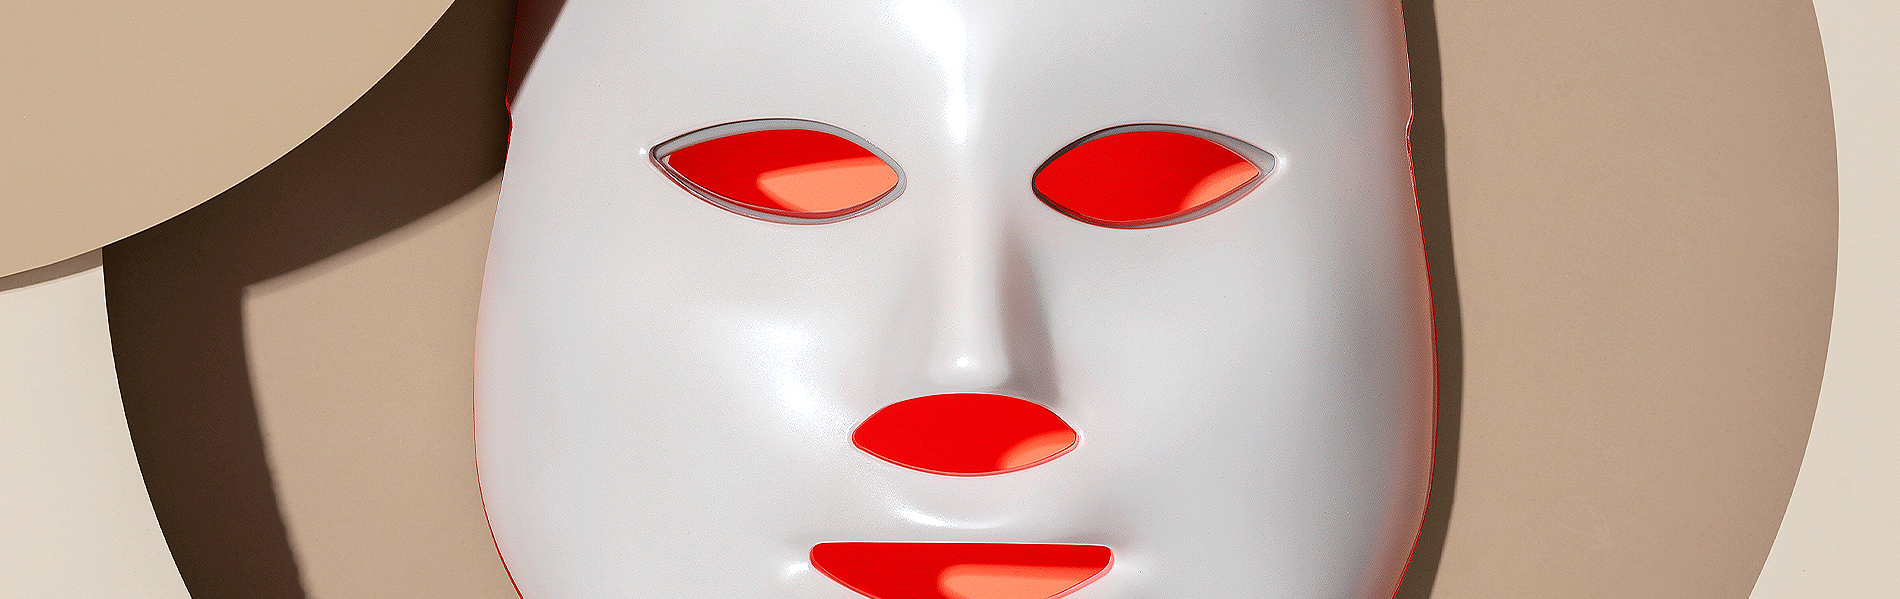 The Dangers Of LED Face Masks You Should Know About